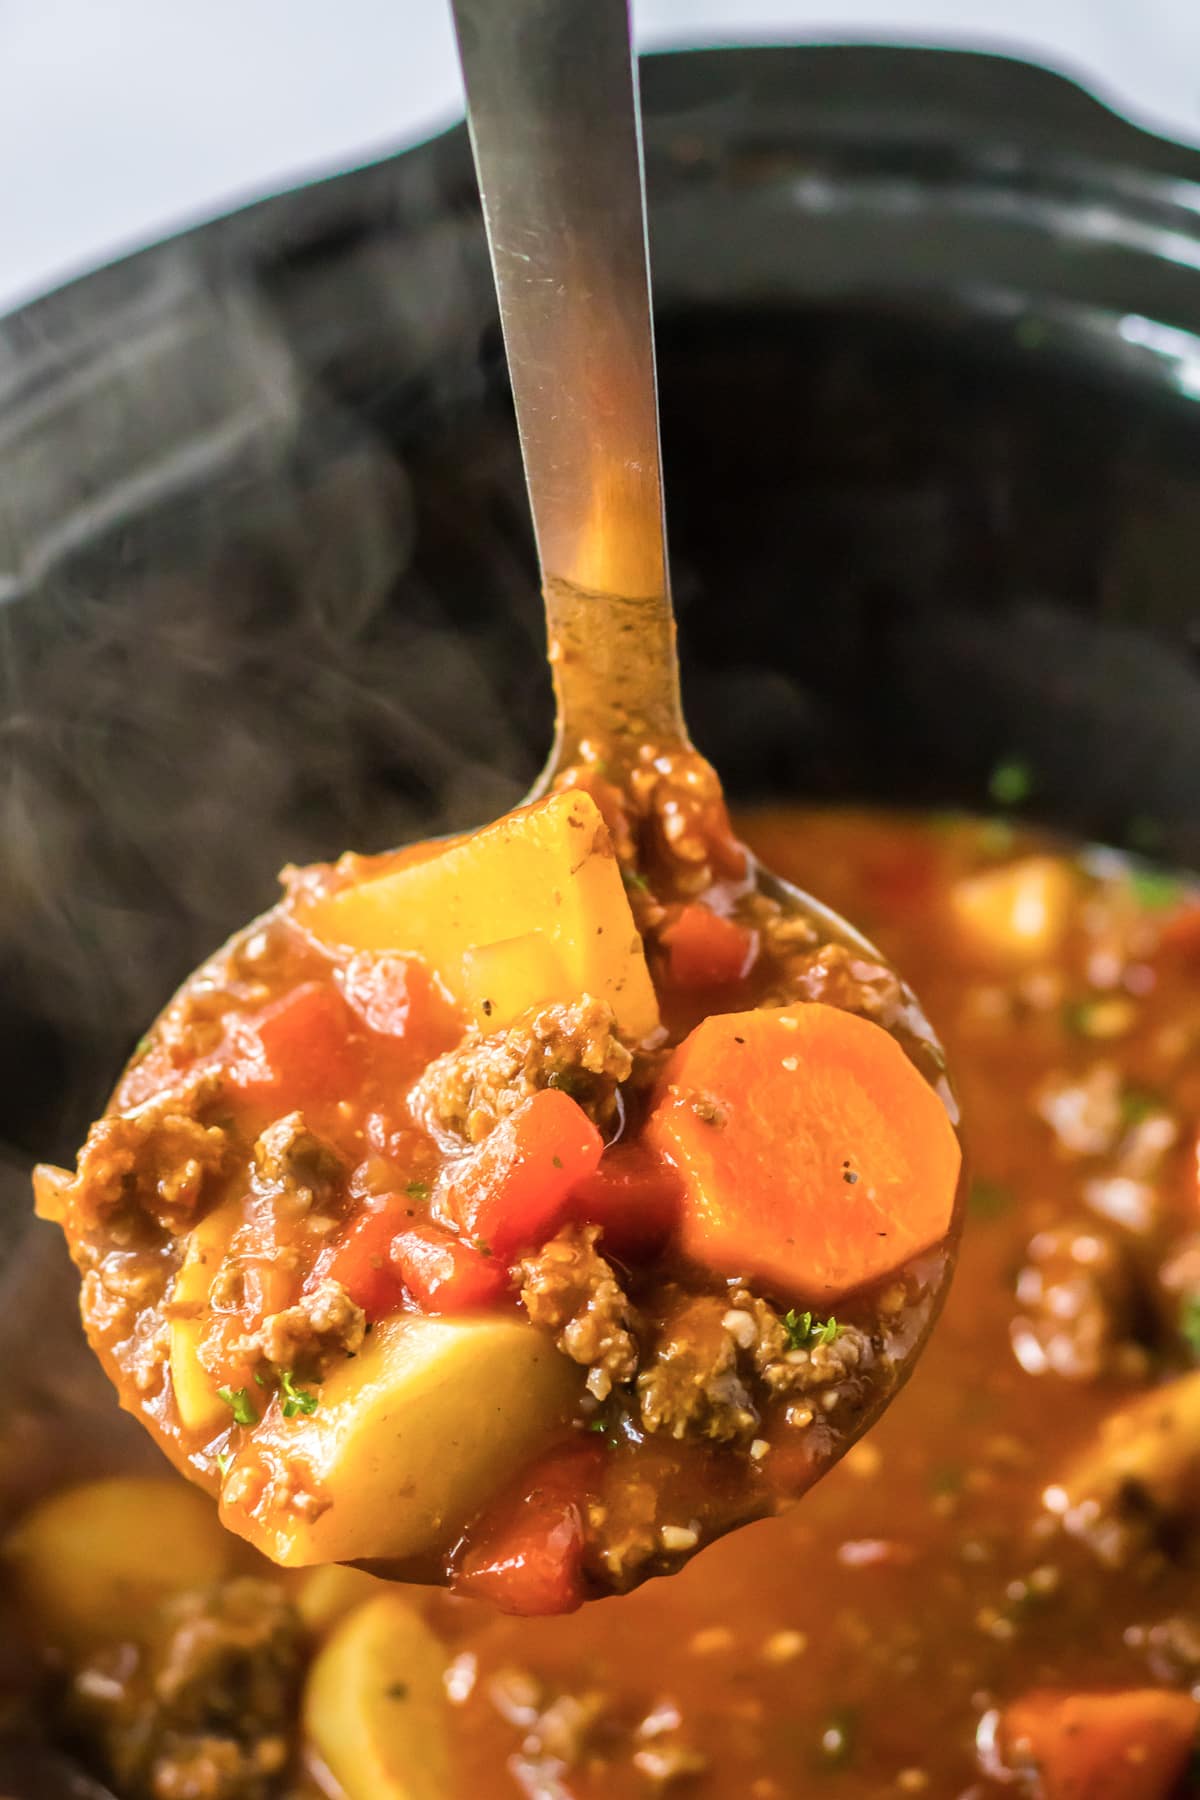 A ladle with a scoop of poor man's stew is being held over a slow cooker full of stew.